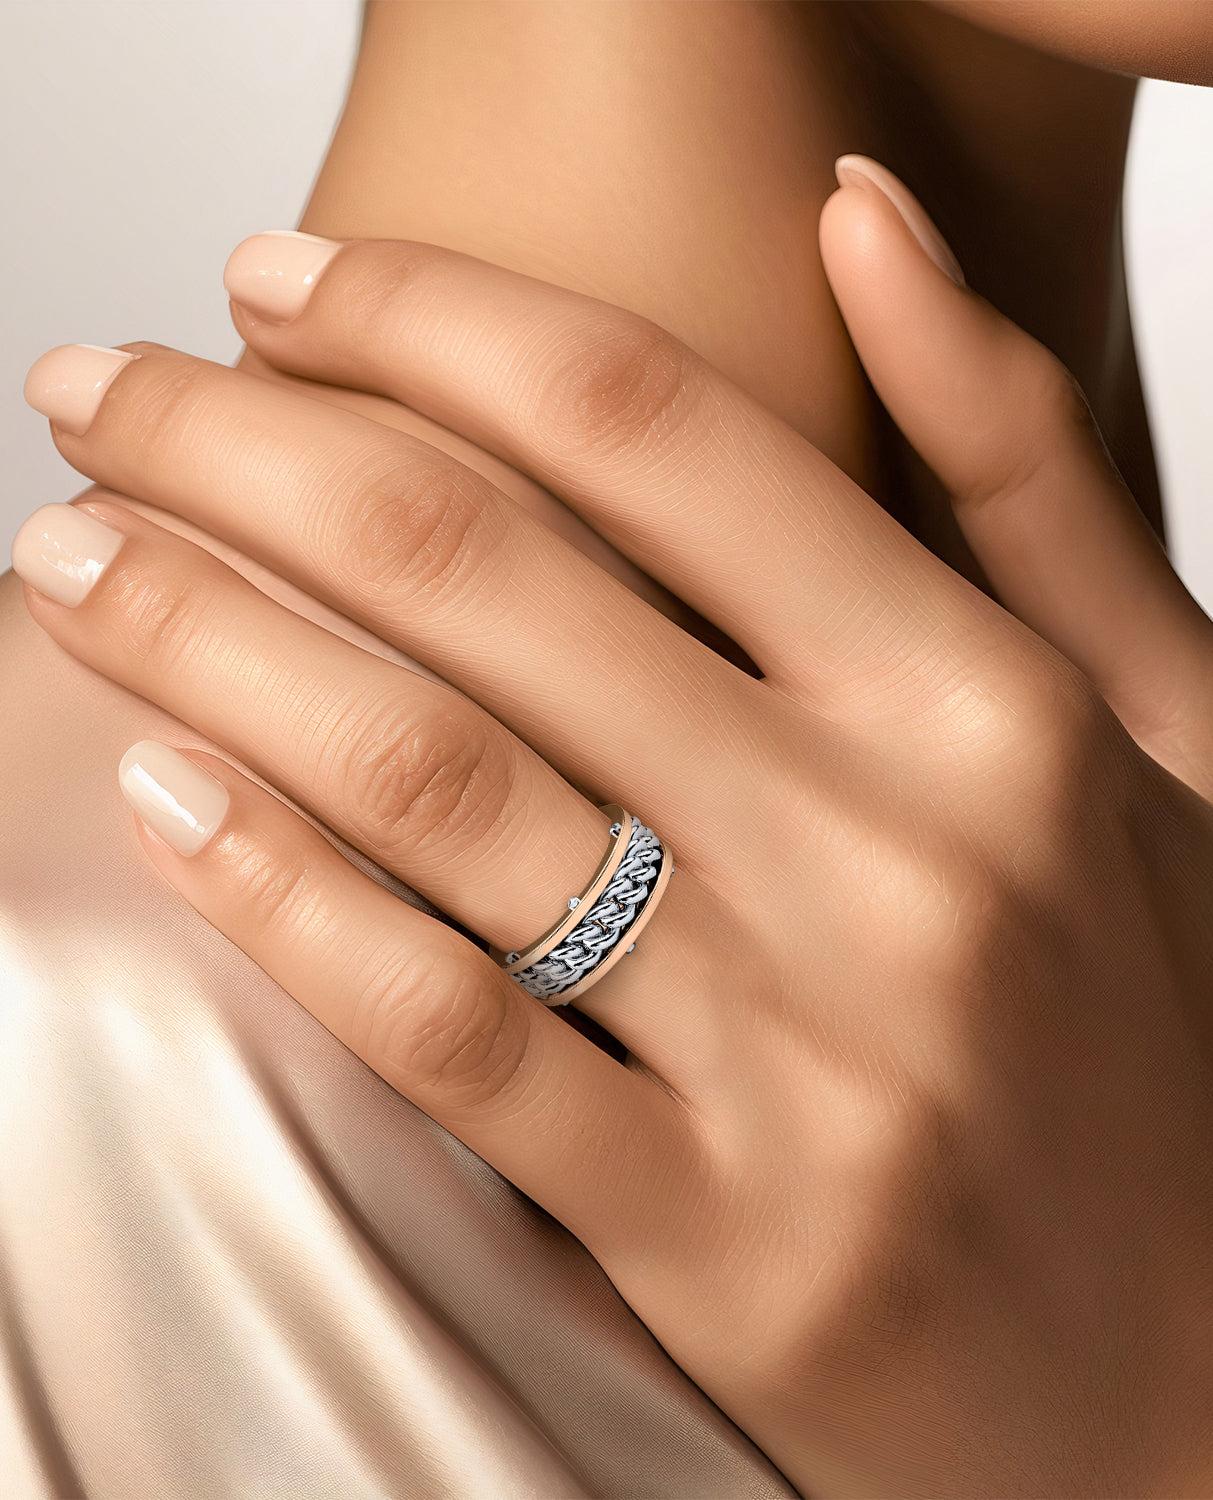 The unmatched uniqueness of the KENSINGTON ring style includes the signature Rockford screw design along the side of the ring. This versatile piece can fit into any occasion, from a statement ring for date night to a unique wedding ring for the